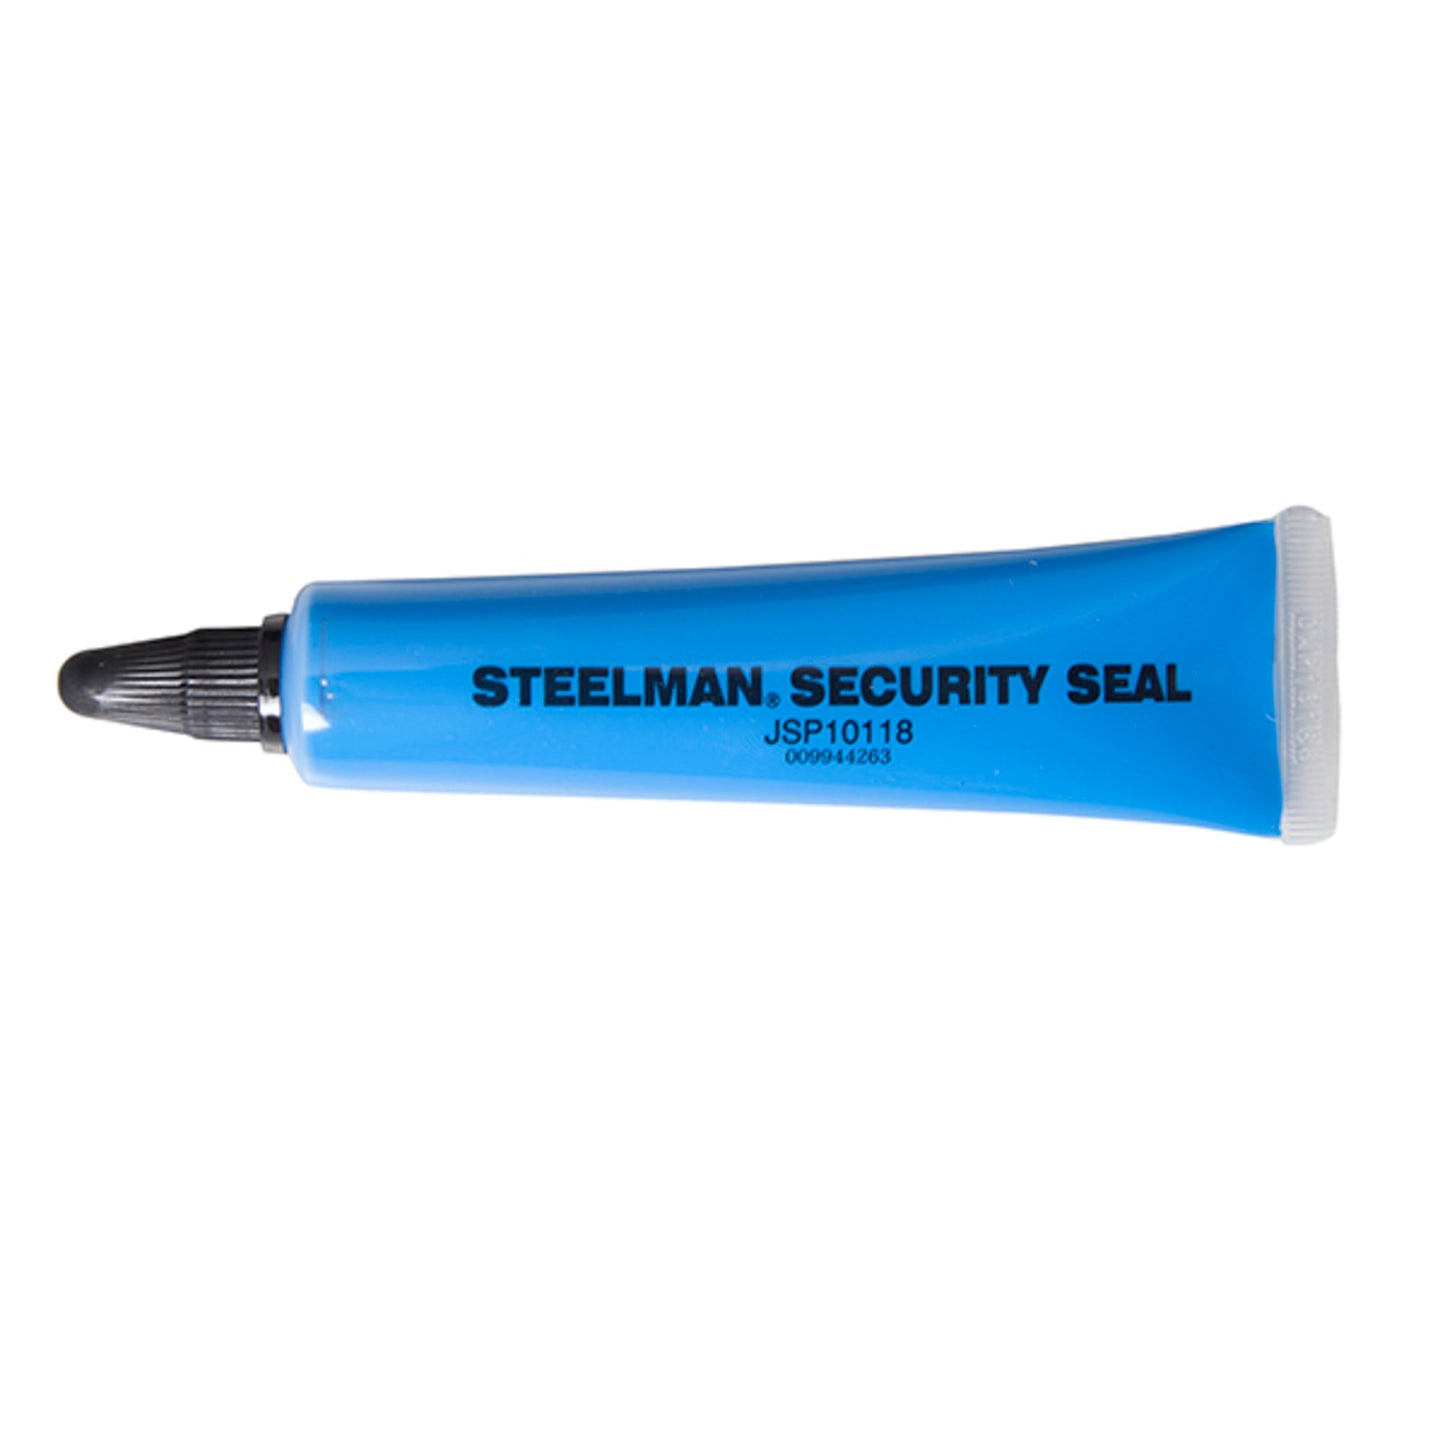 1-Ounce Security Seal, Pack of 10 (4-Pack)